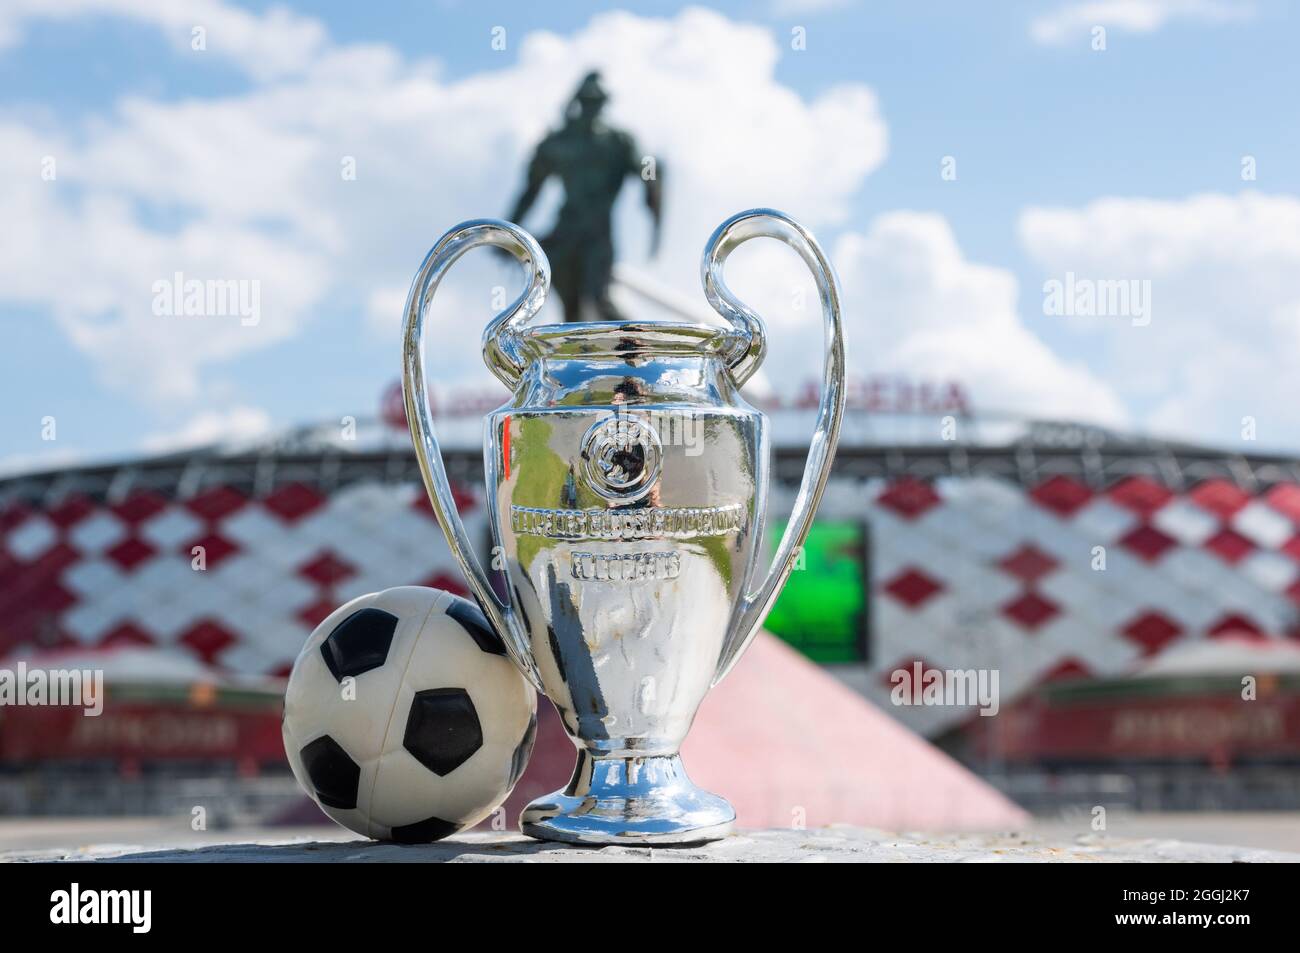 June 14, 2021 Moscow, Russia, UEFA Champions League Cup in front of a modern stadium. Stock Photo